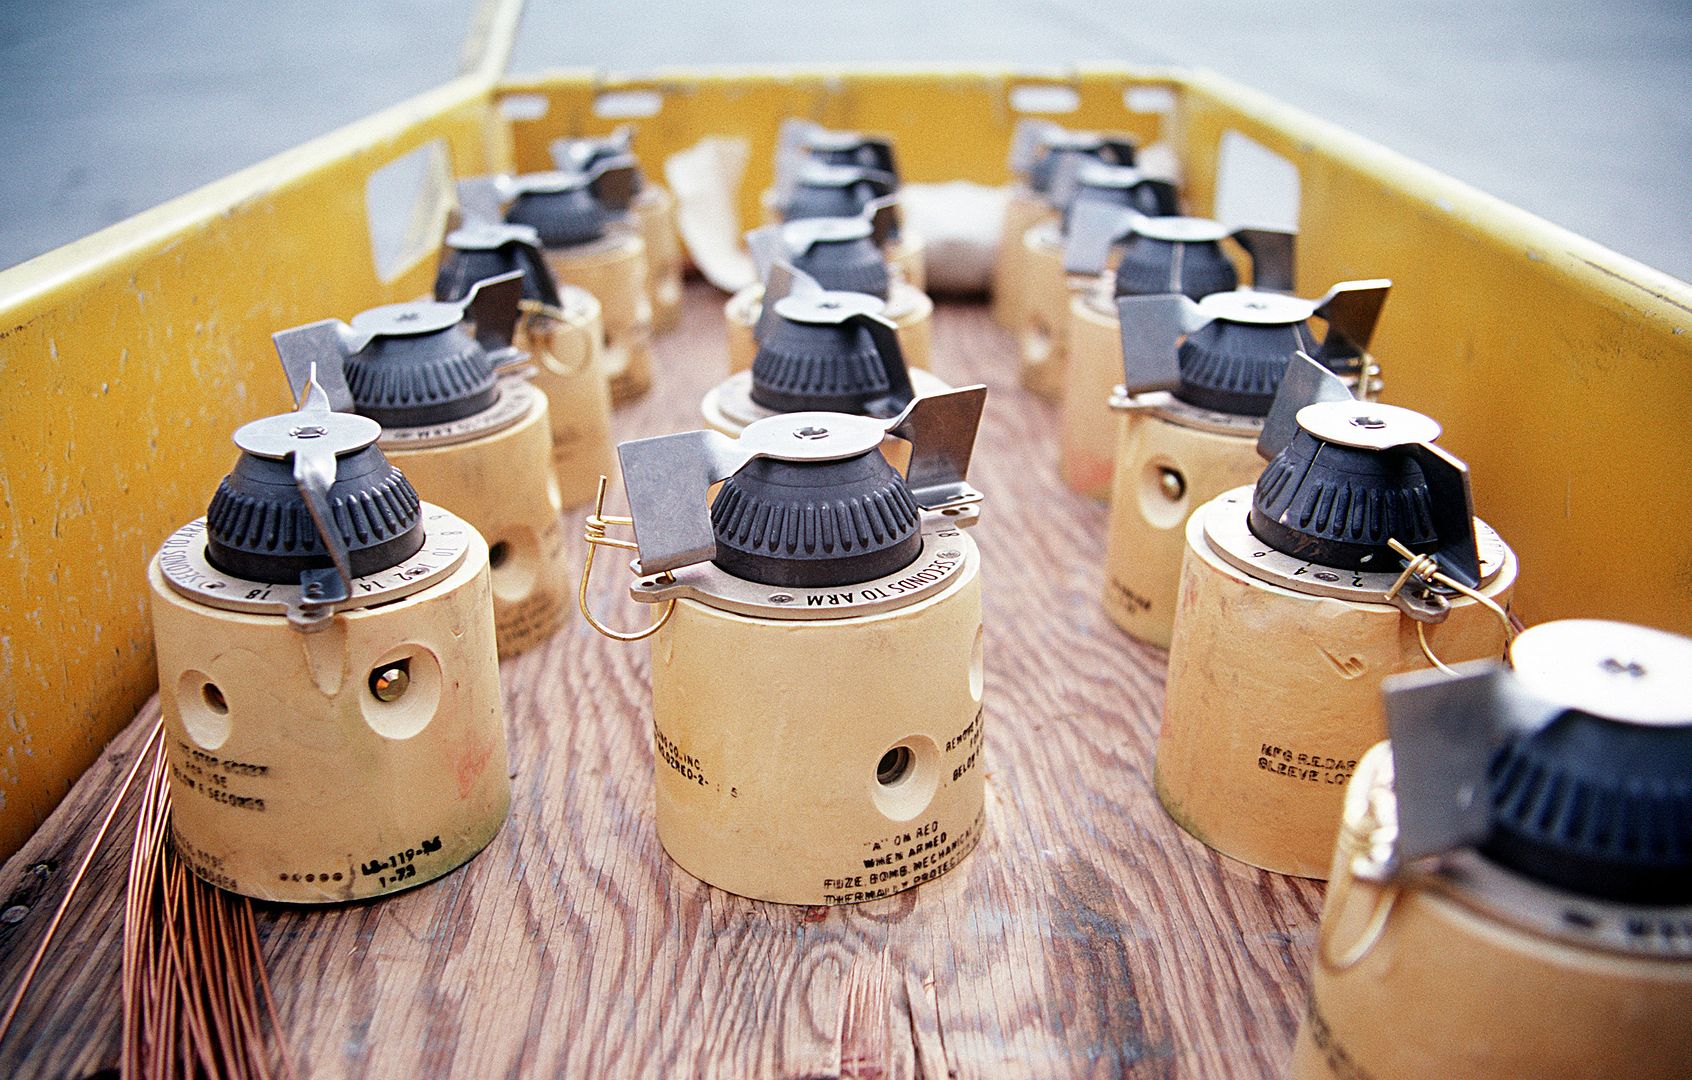 A View Of The Fuses Used To Arm Several Bombs During Loading Operations With A 6E Intruder Aircraft From Carrier Air Wing 6